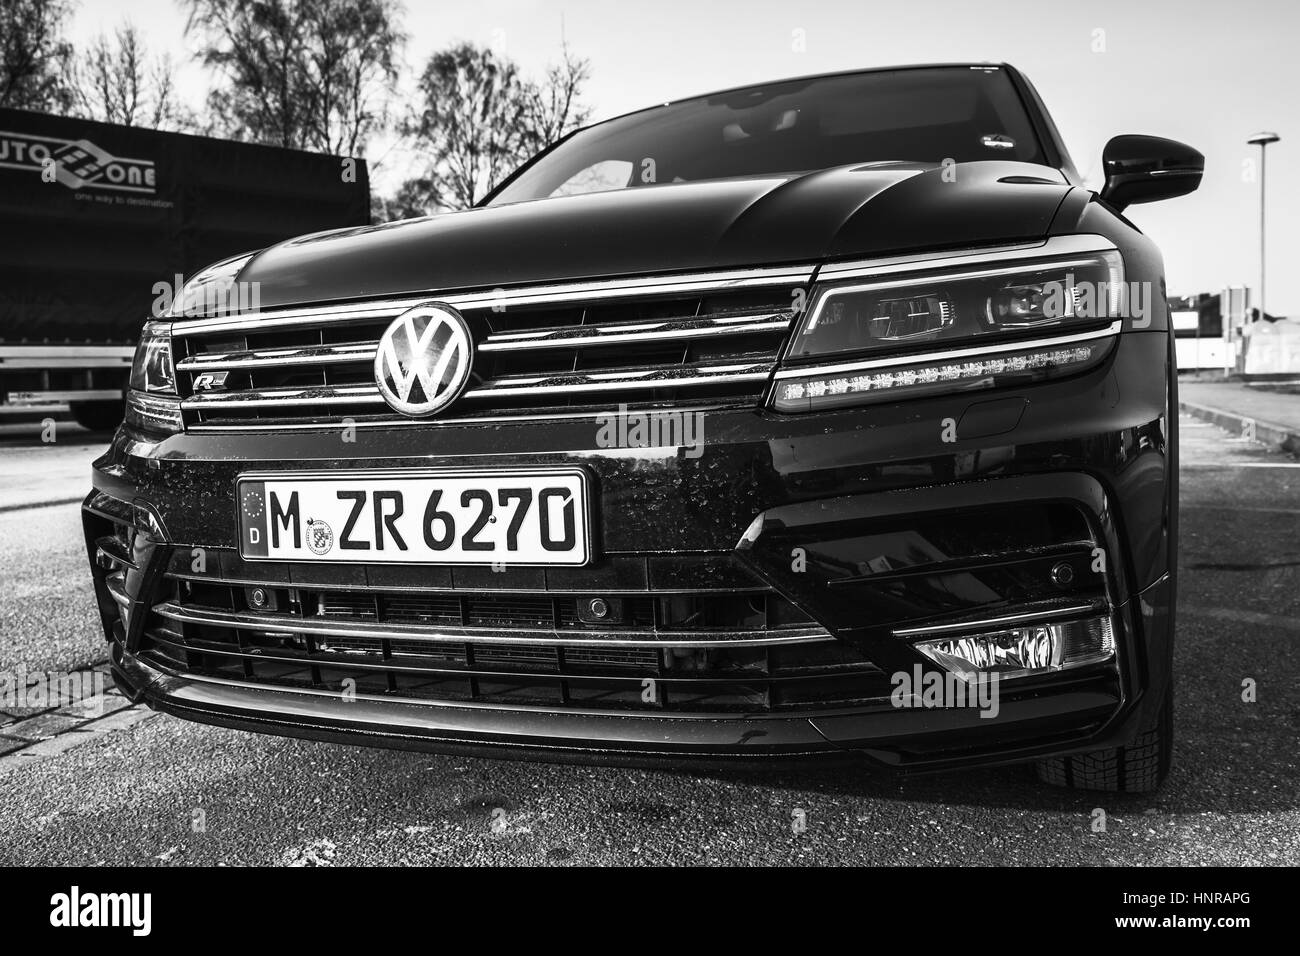 Hamburg, Germany - February 10, 2017: Outdoor photo of new generation Volkswagen Tiguan, R-Line. Compact crossover vehicle by German automaker Volkswa Stock Photo